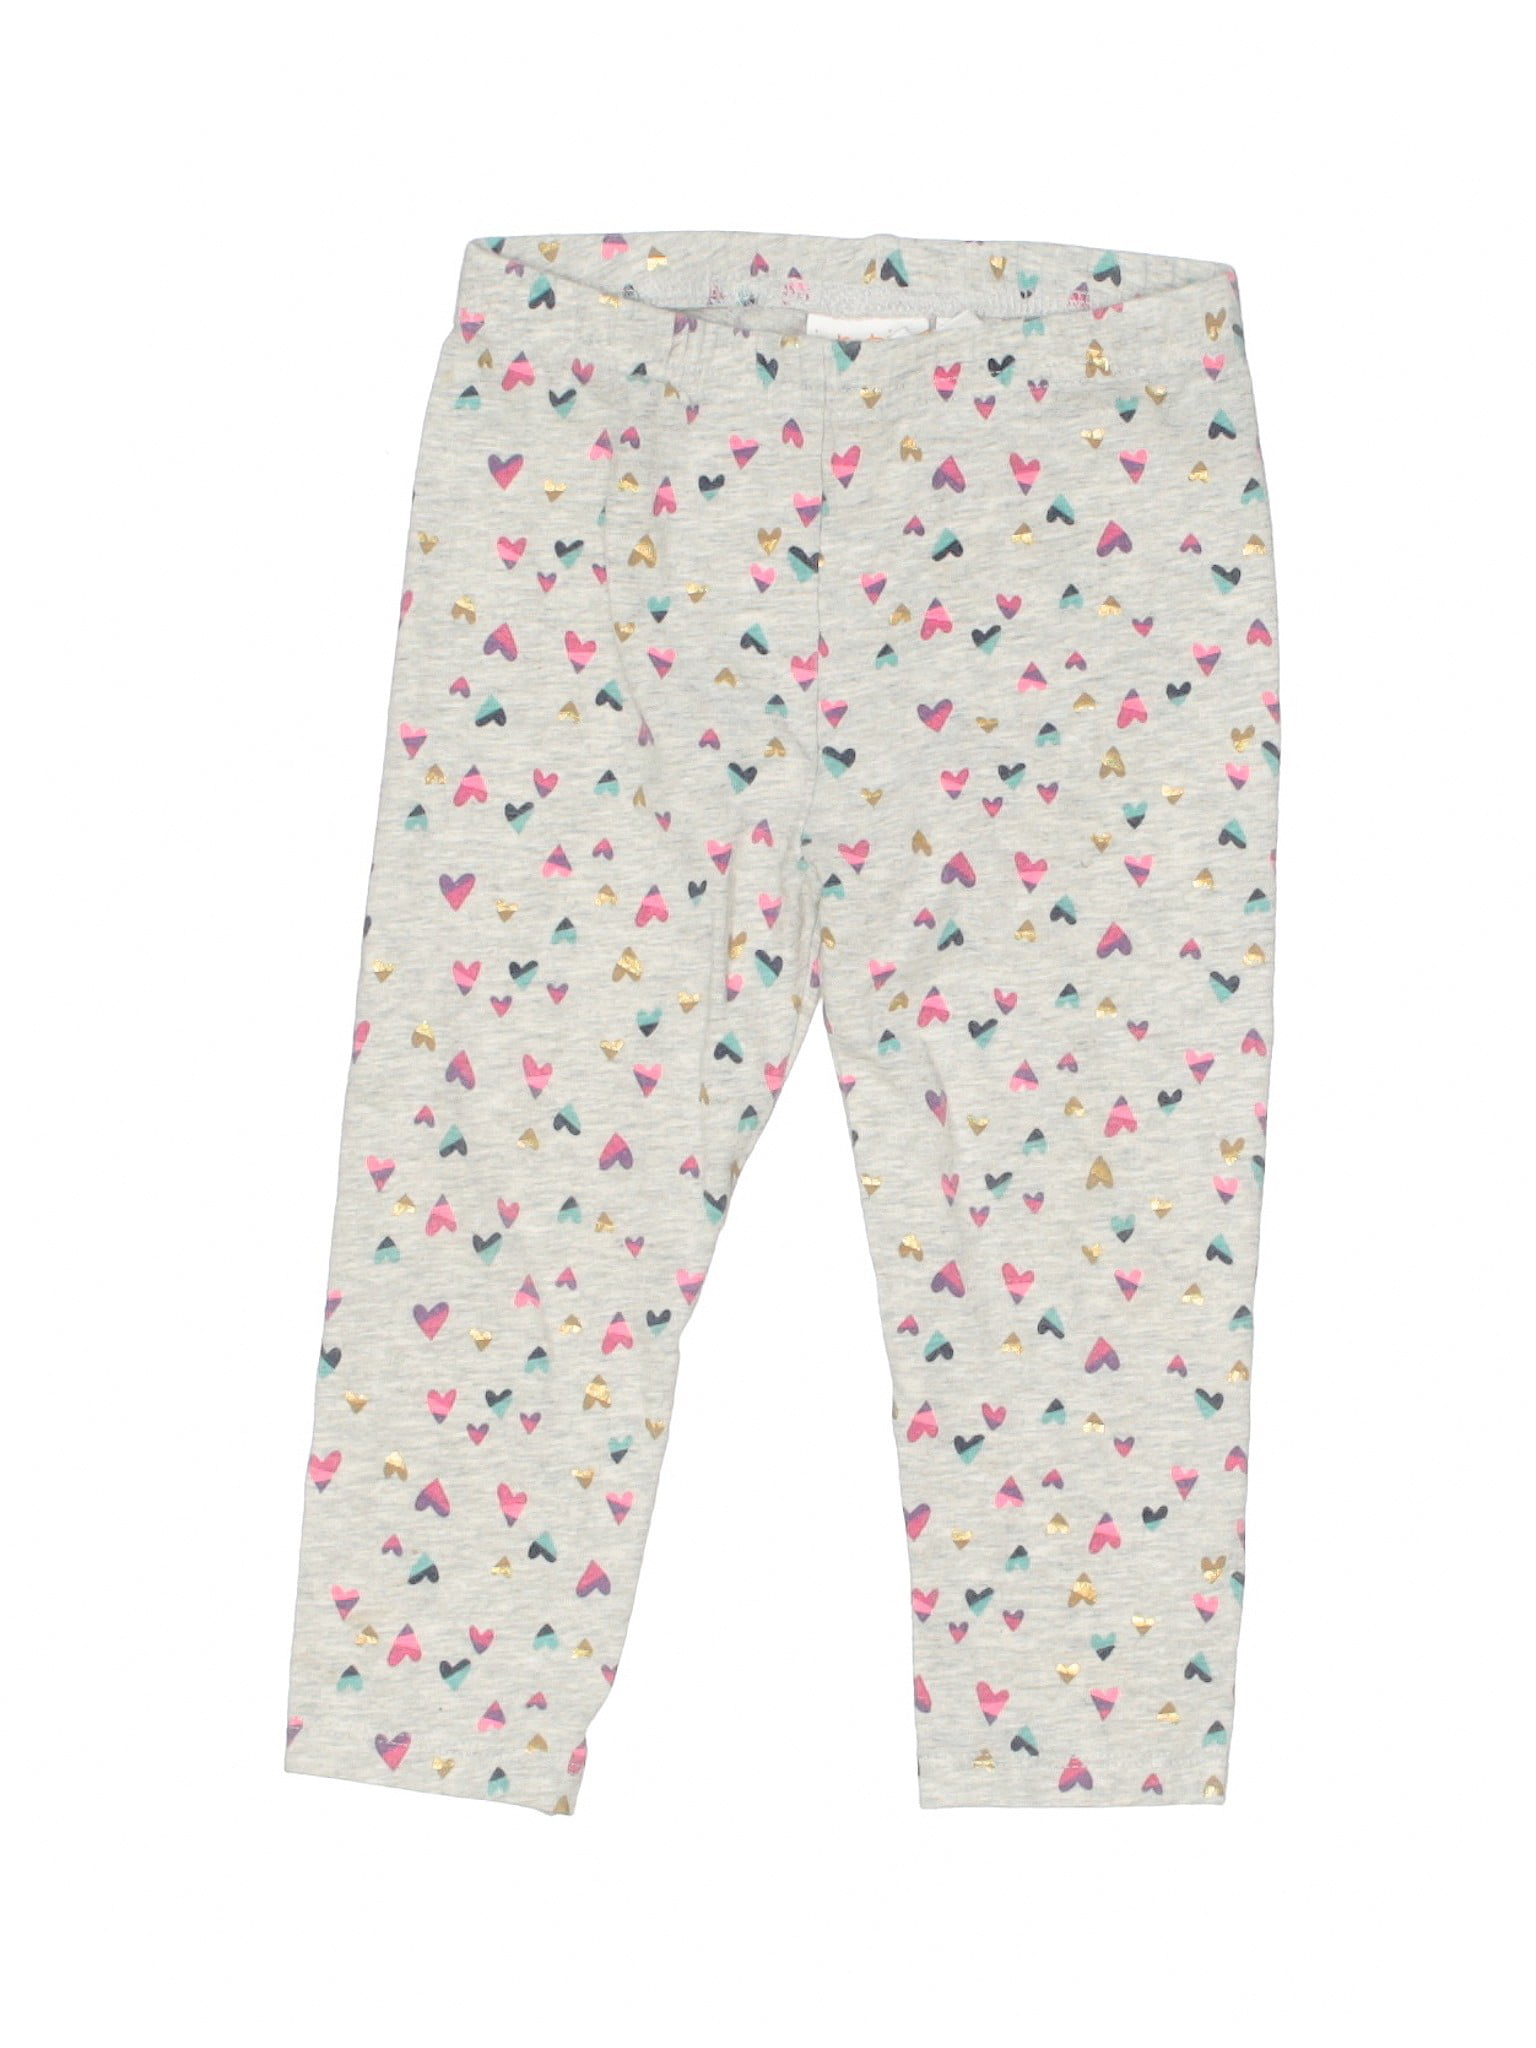 Jumping Beans - Pre-Owned Jumping Beans Girl's Size 24 Mo Leggings ...